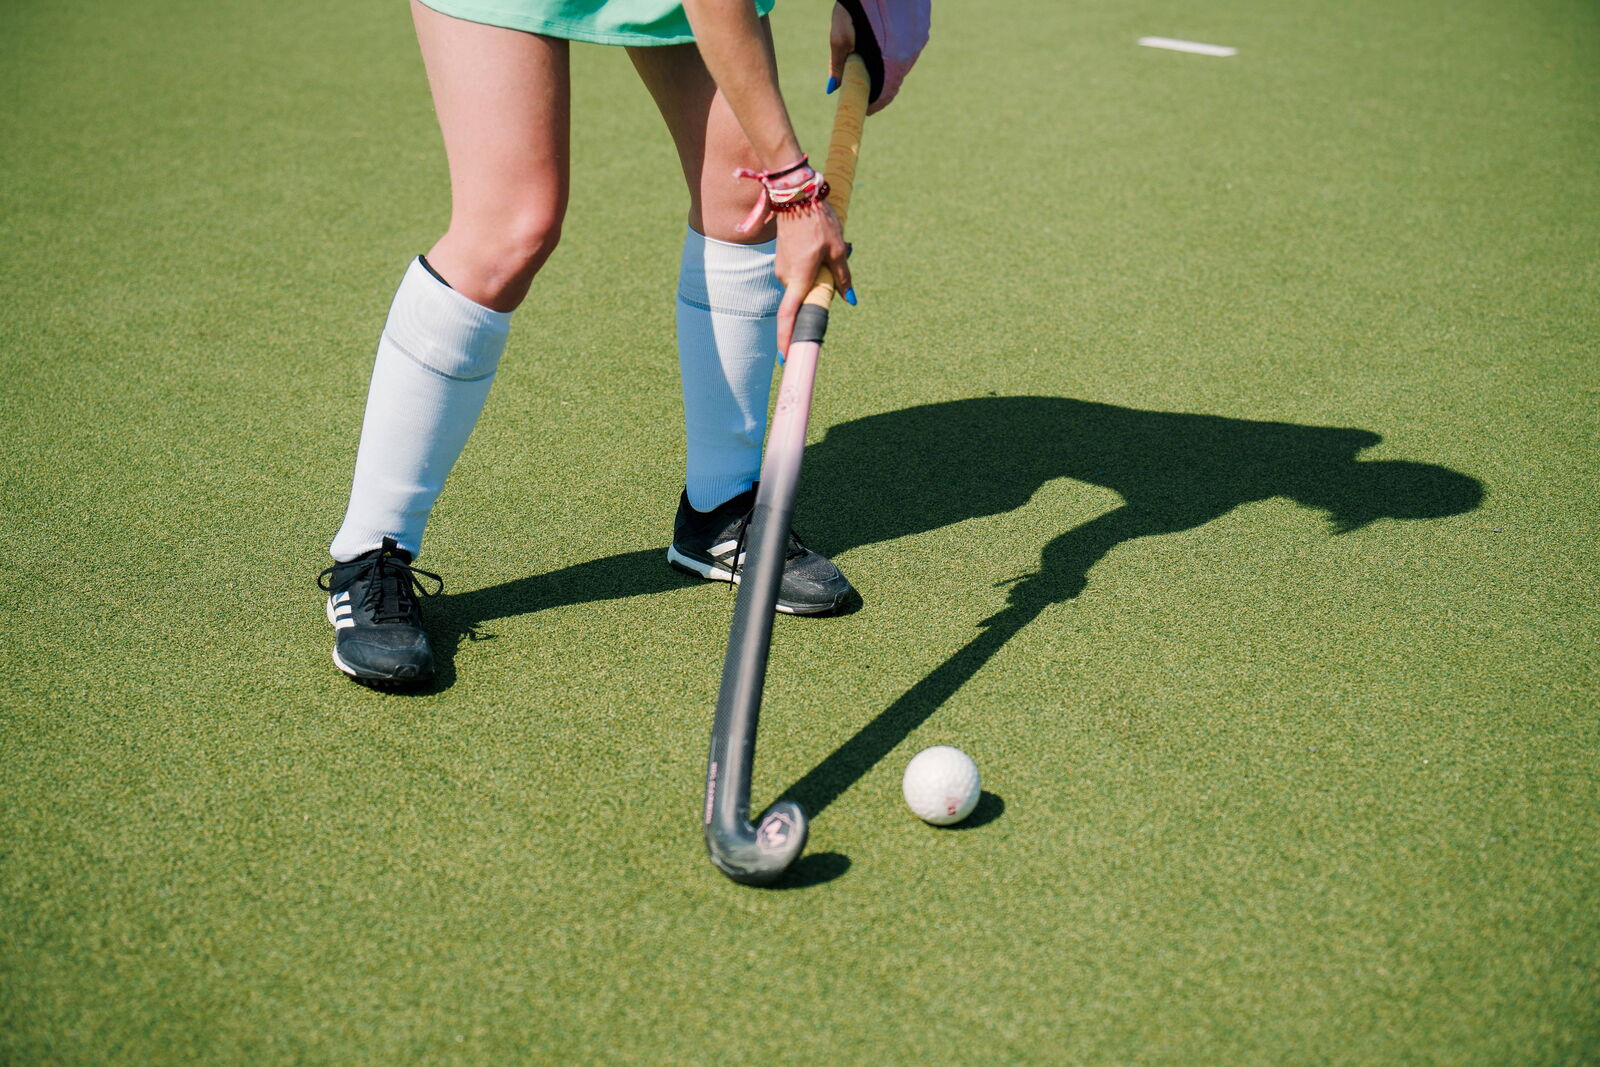 Hockey field with player and her shadow Resized